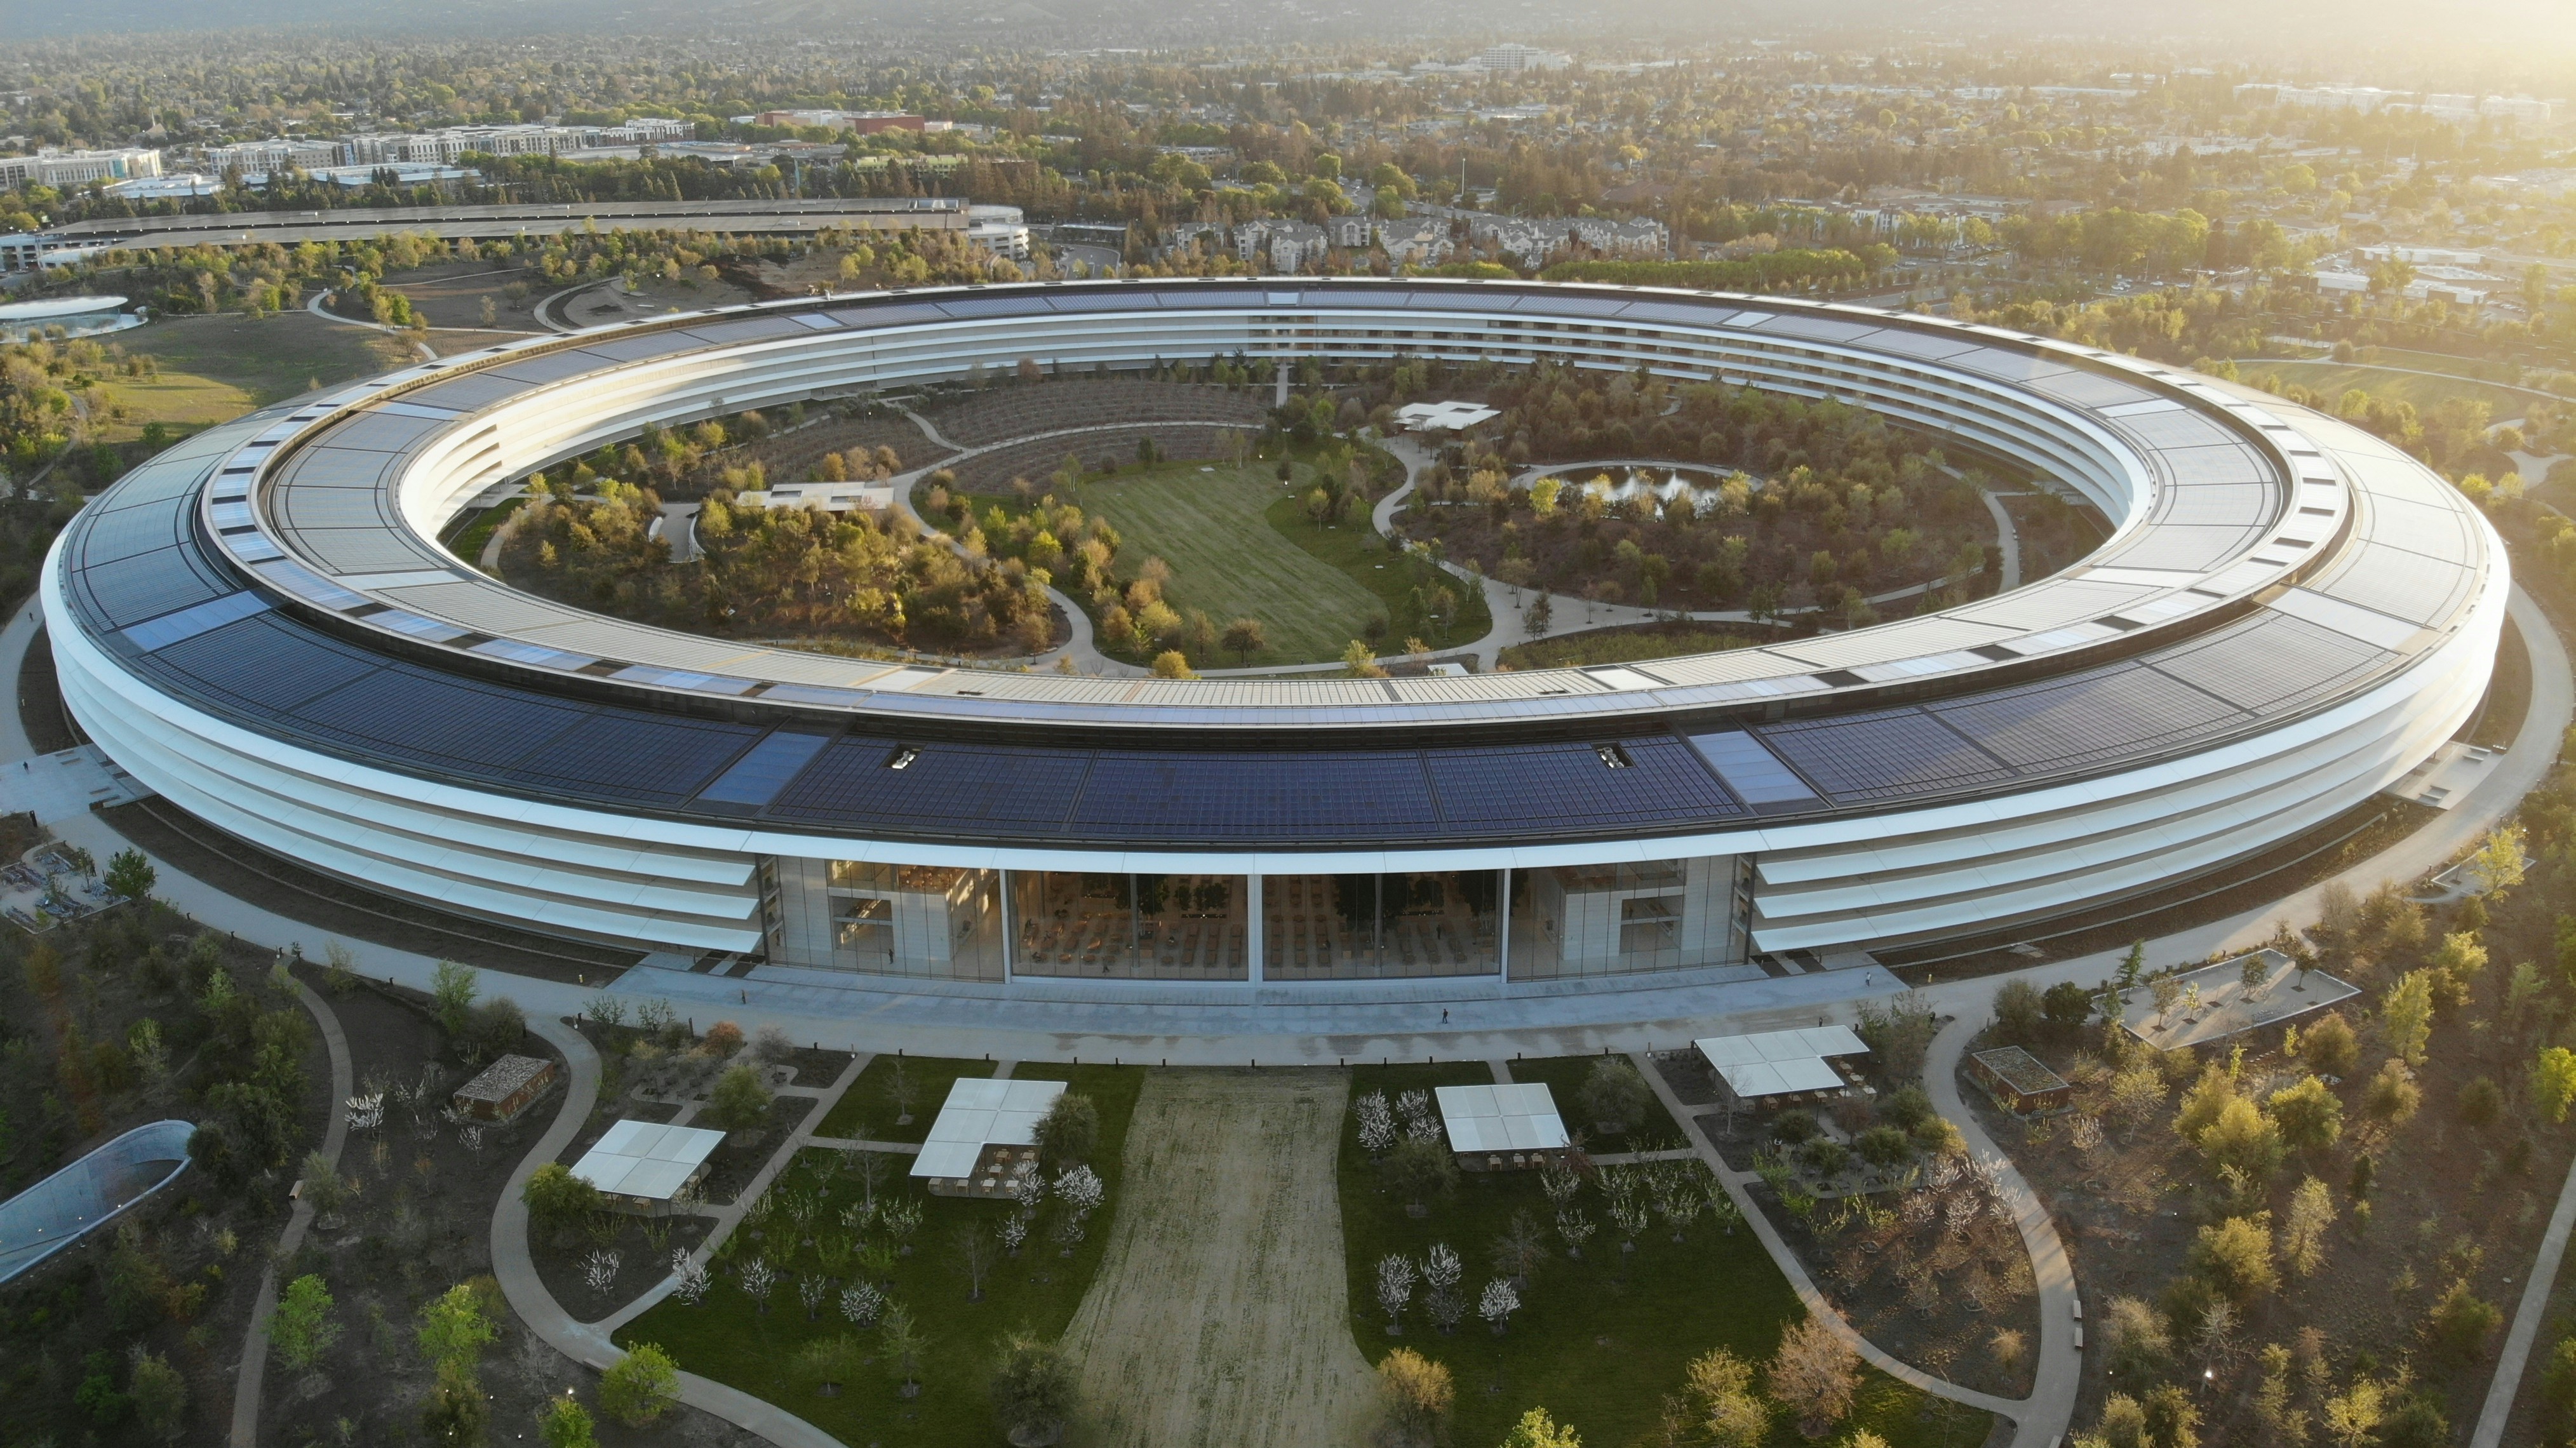 Apple's torus-shared campus, seen from above.